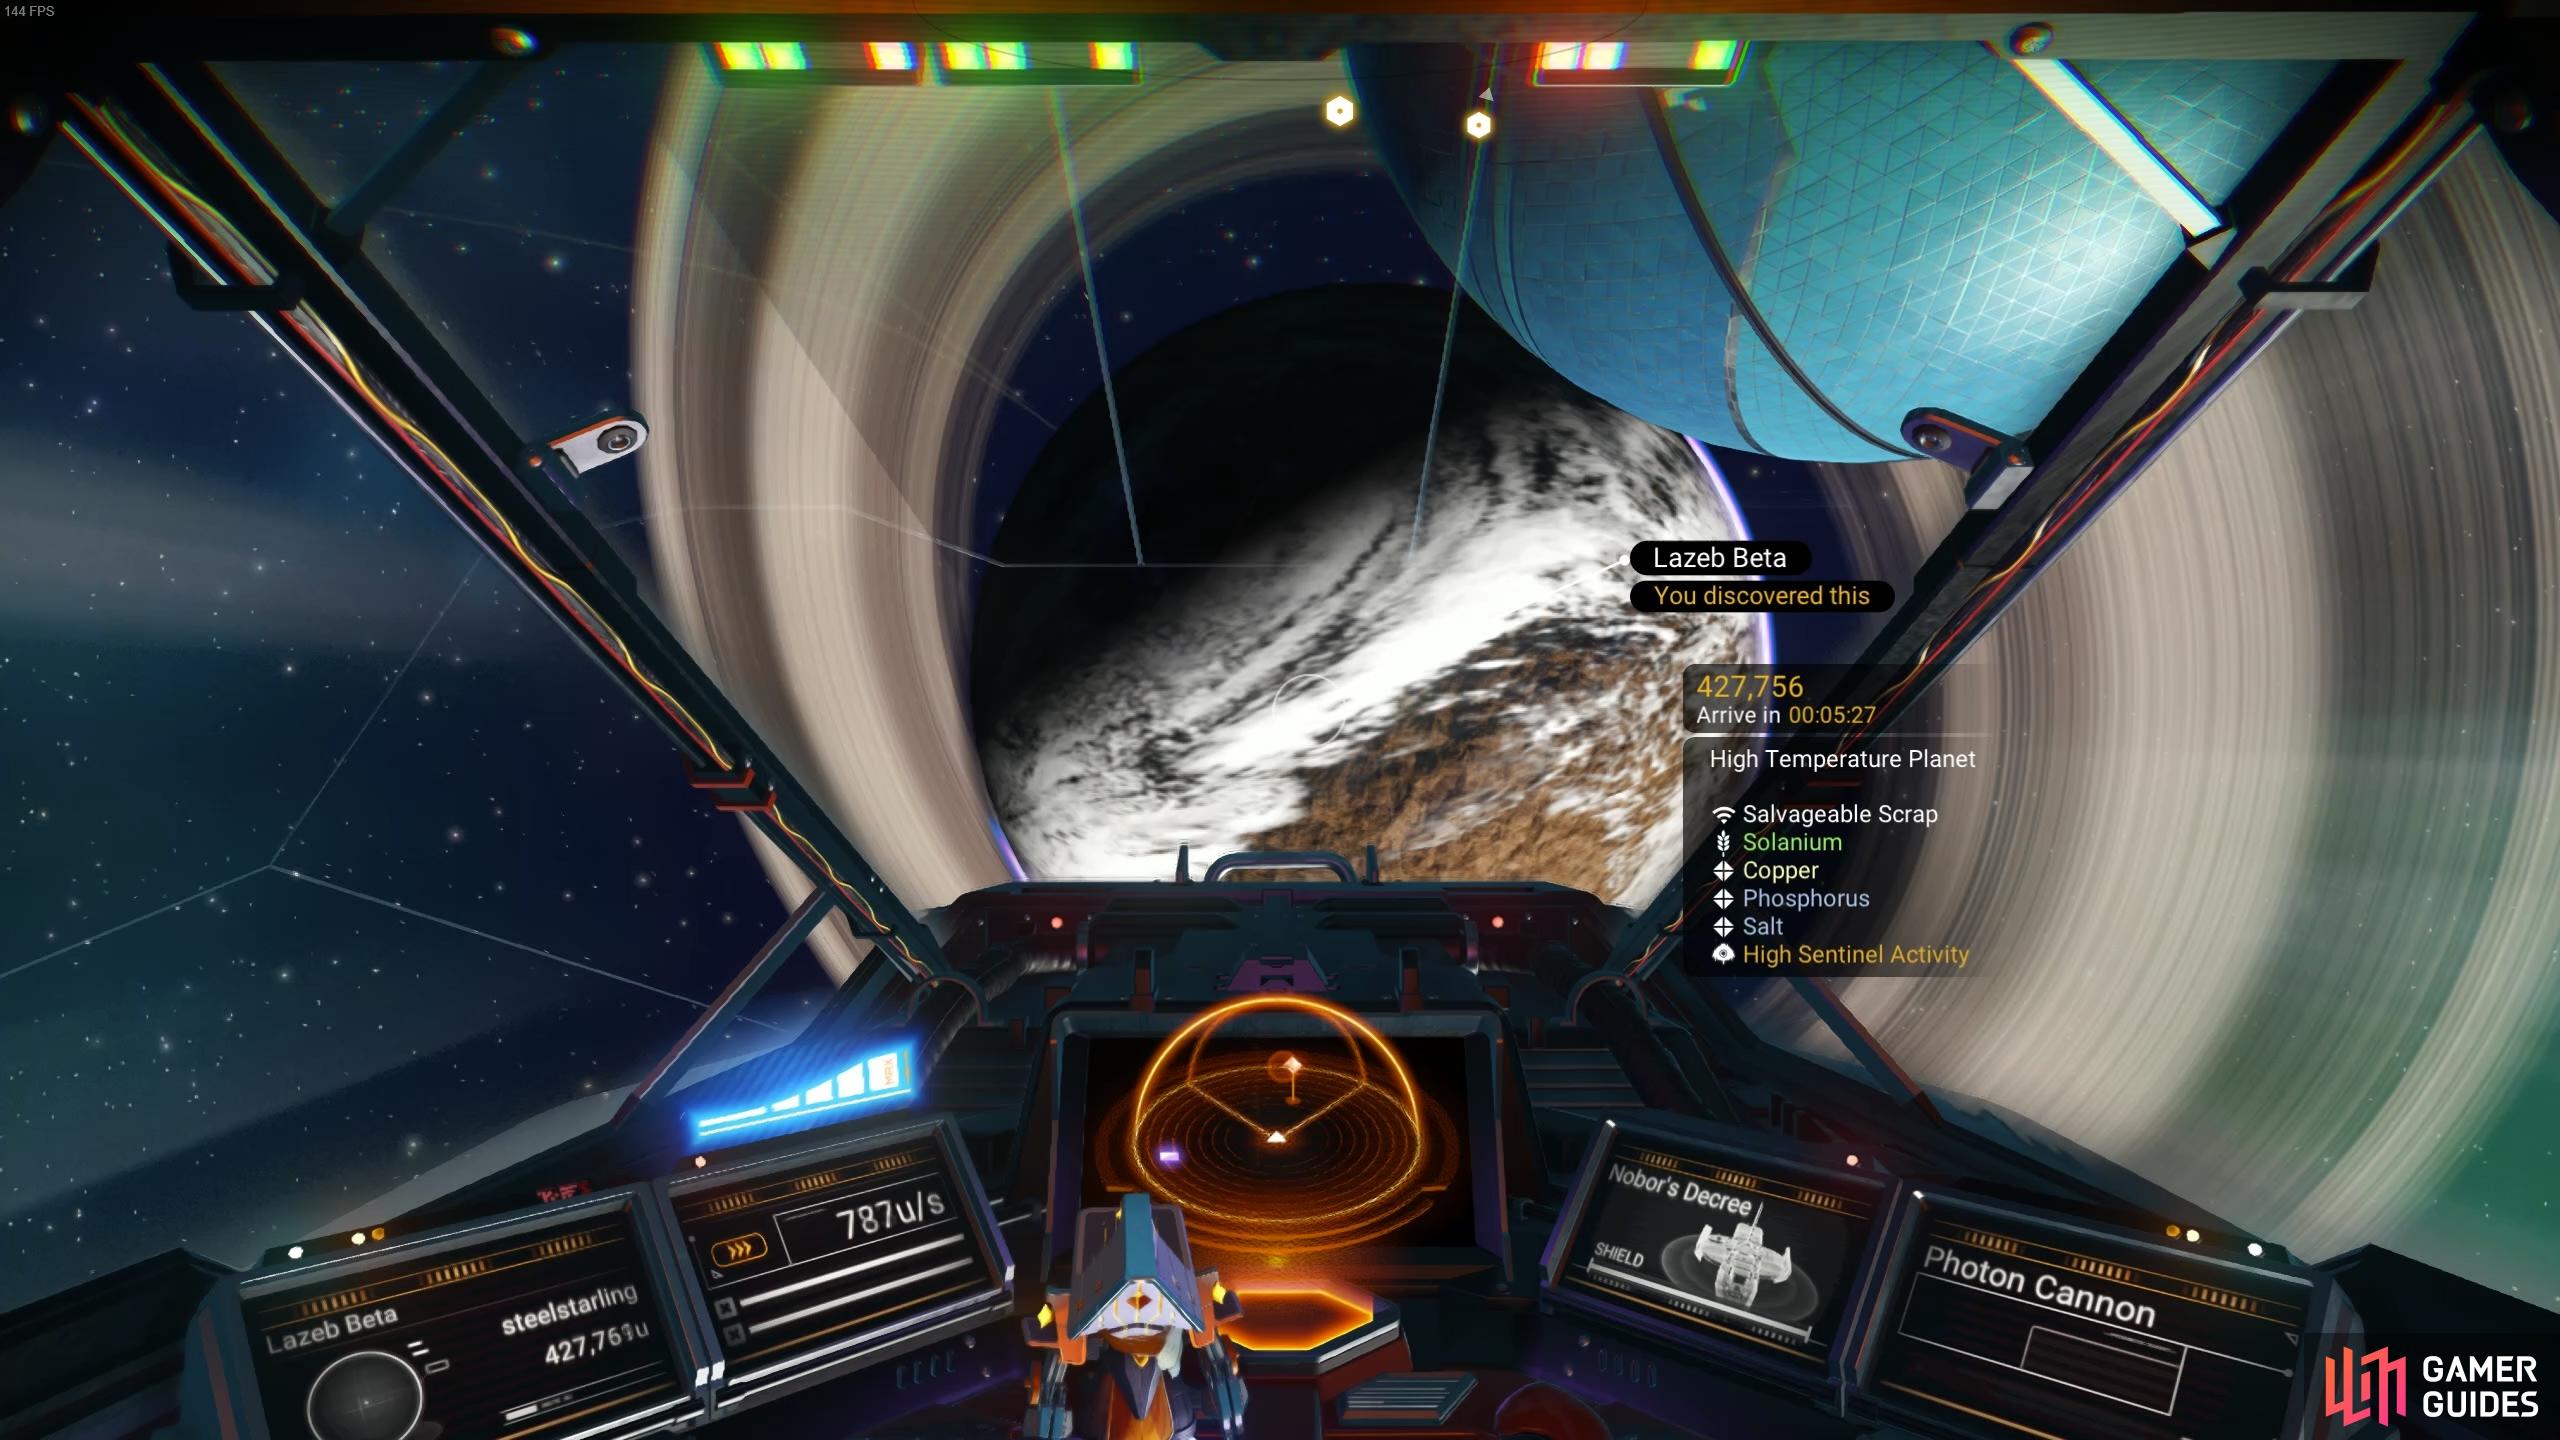 You can scan a planet from your starship to check whether it has Phosphorus present.